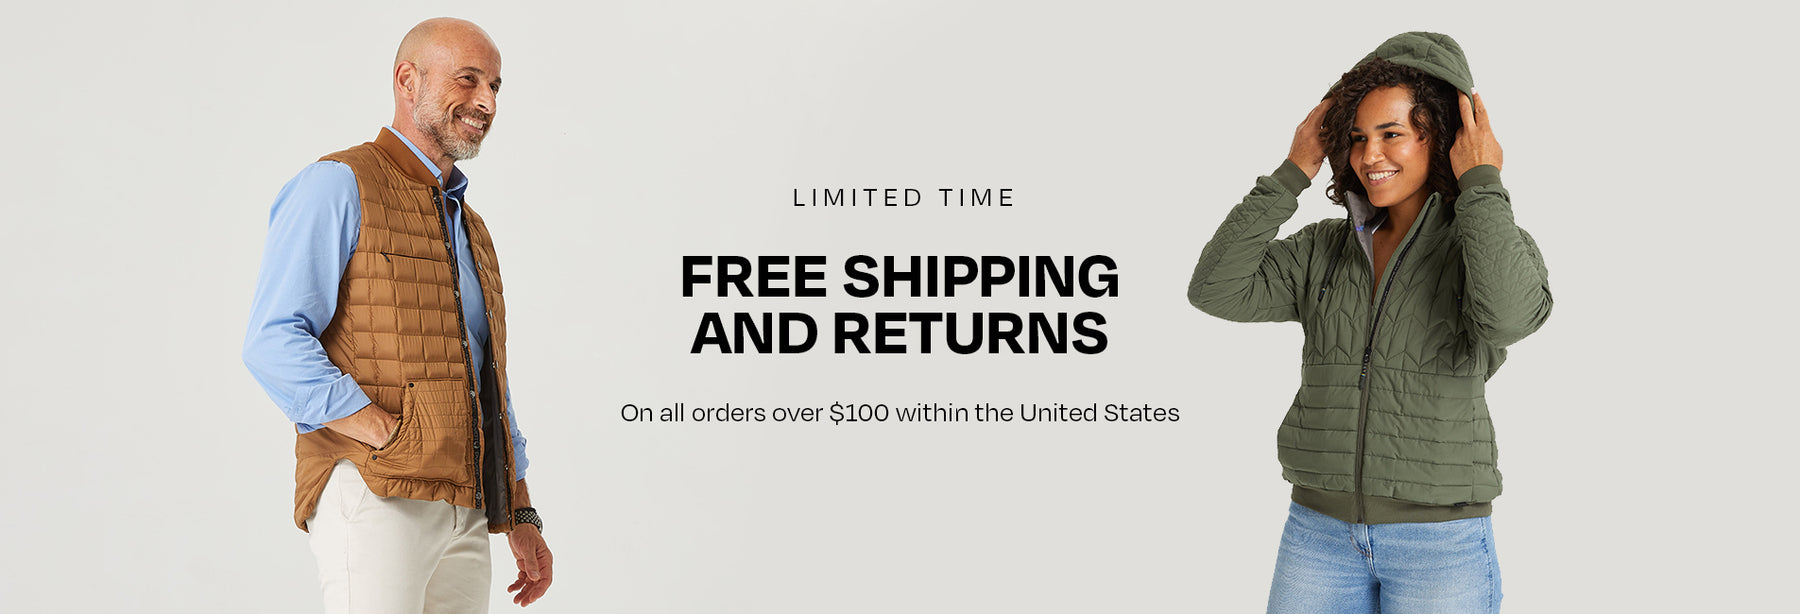 FREE SHIPPING AND RETURNS On all orders over $100 within the United States